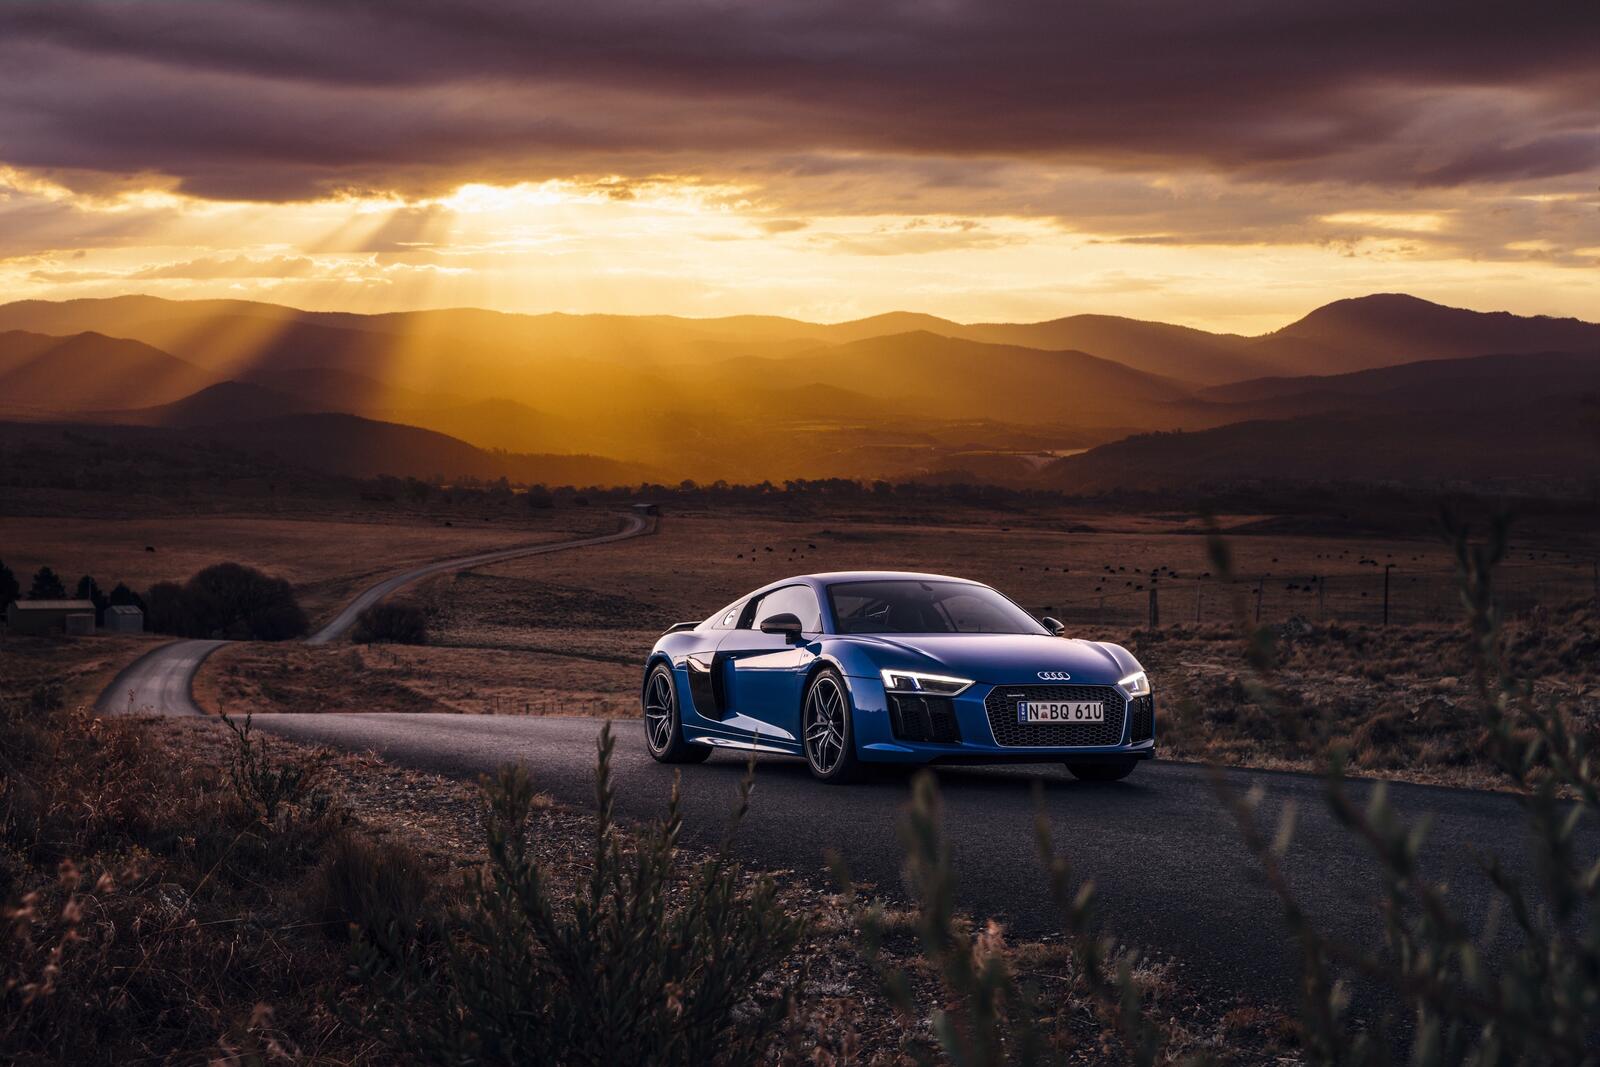 Free photo Blue Audi R8 Le Mans Concept at sunset on a desert road